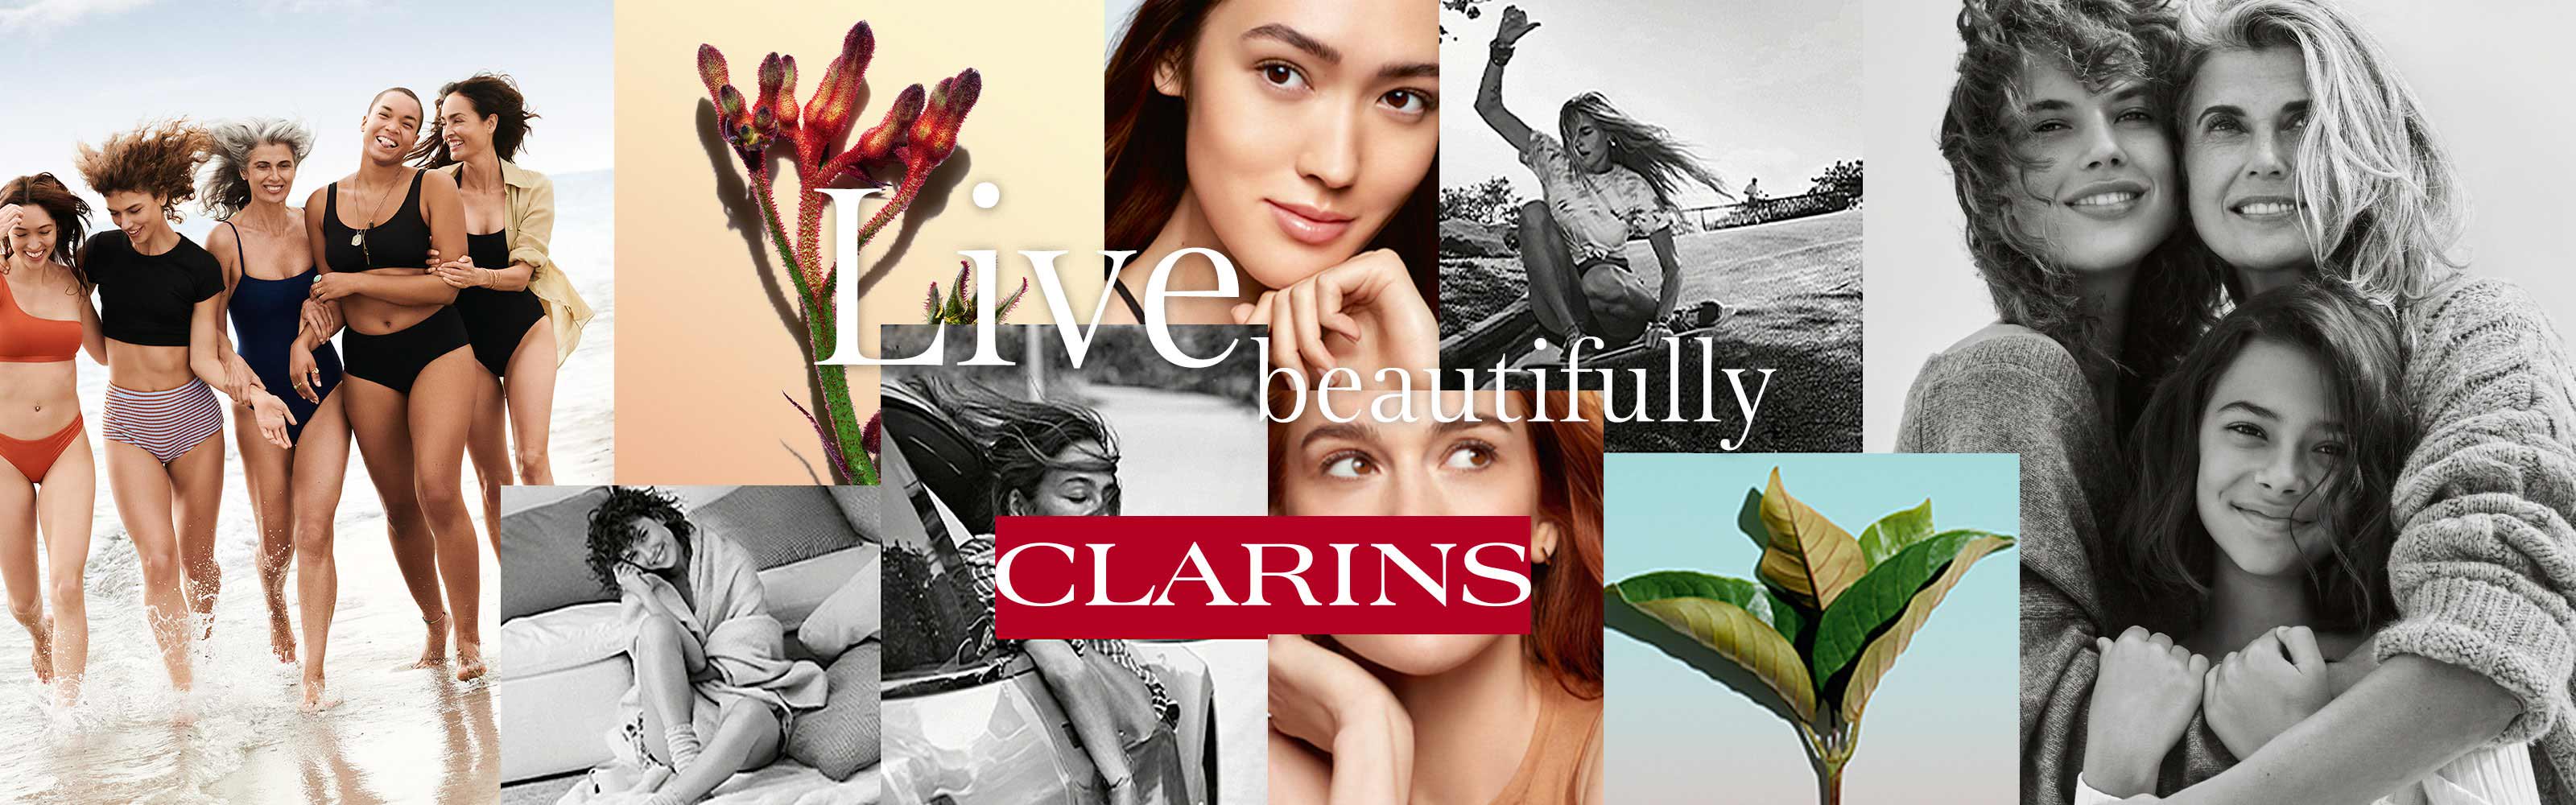 Clarins Live Beautifully